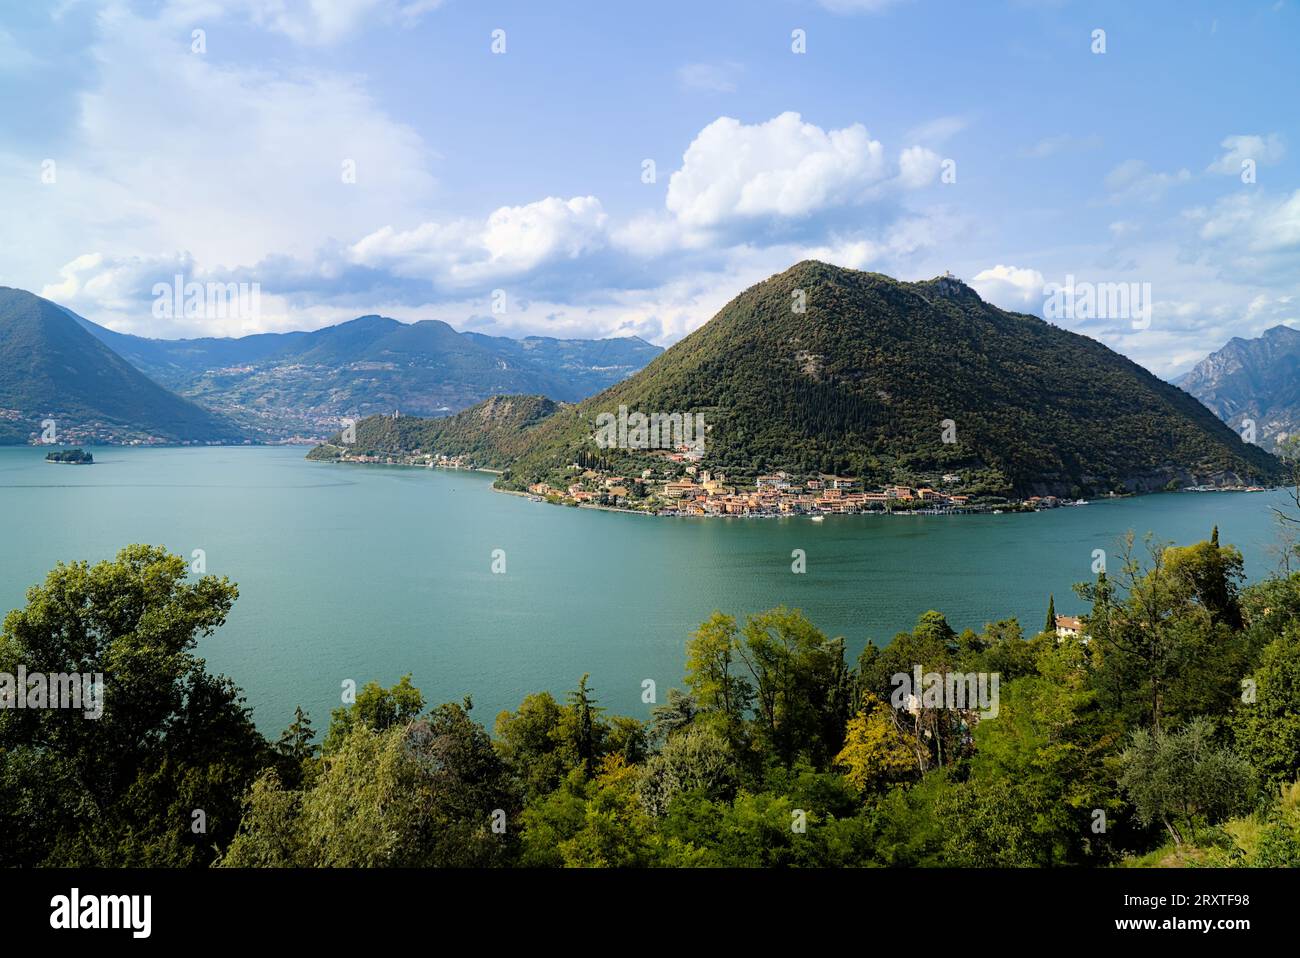 A panoramic view over the Lake Iseo and the Monte Isola island in northern Italy Stock Photo